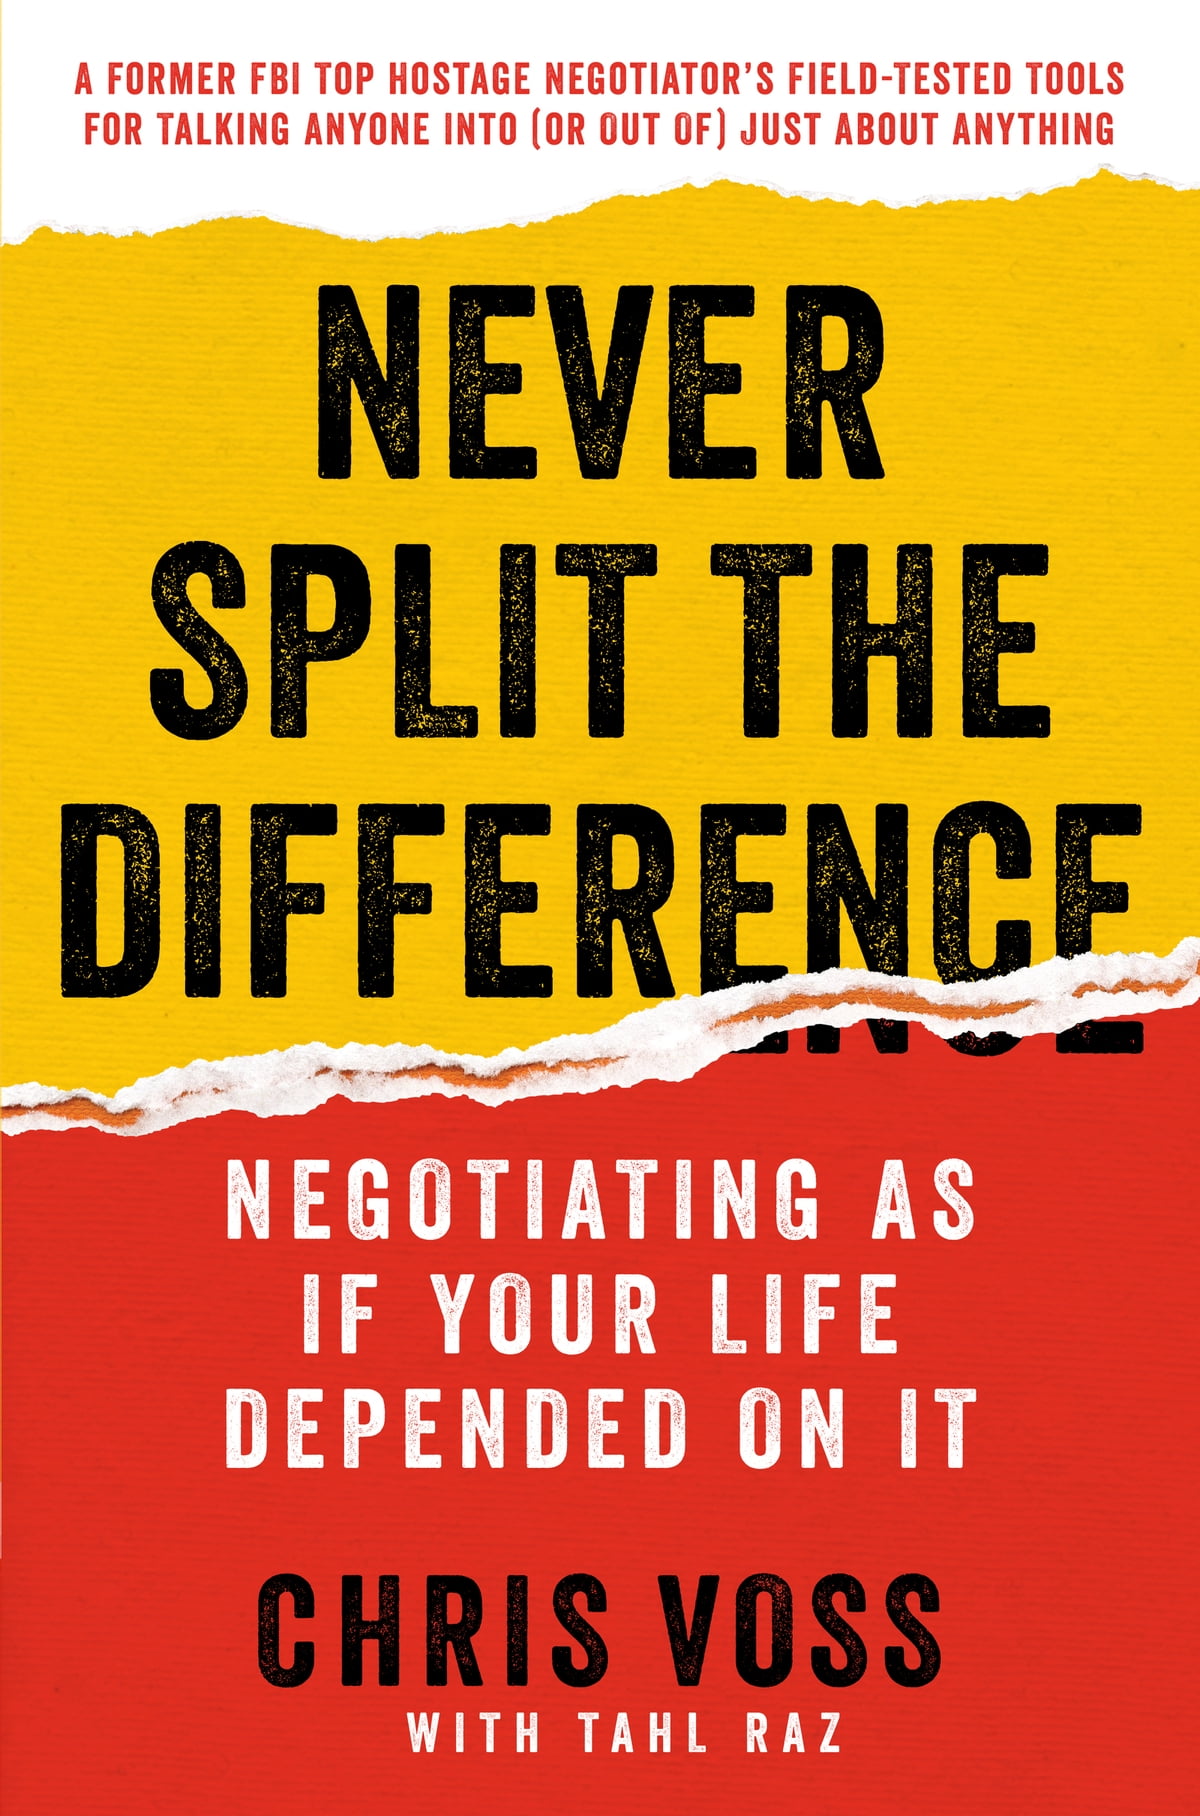 Product owner Boek - never split the difference